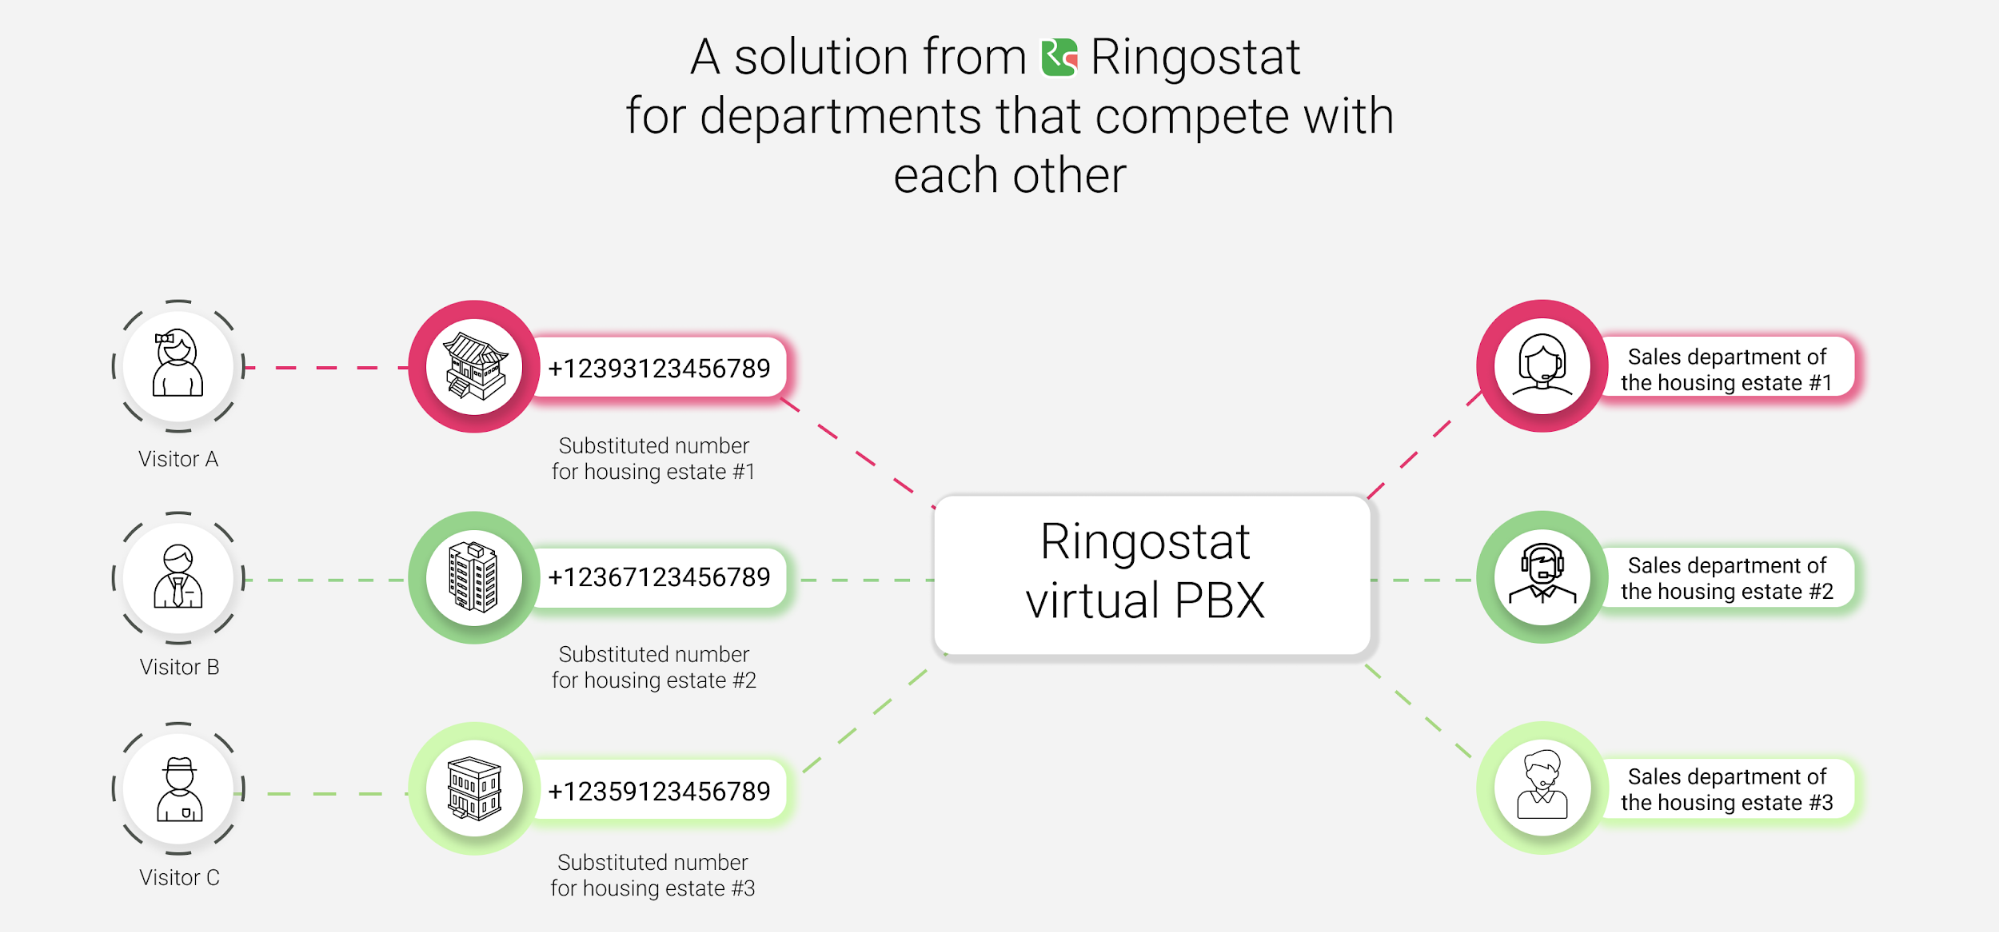 A solution from Ringostat for departments that compete with each other